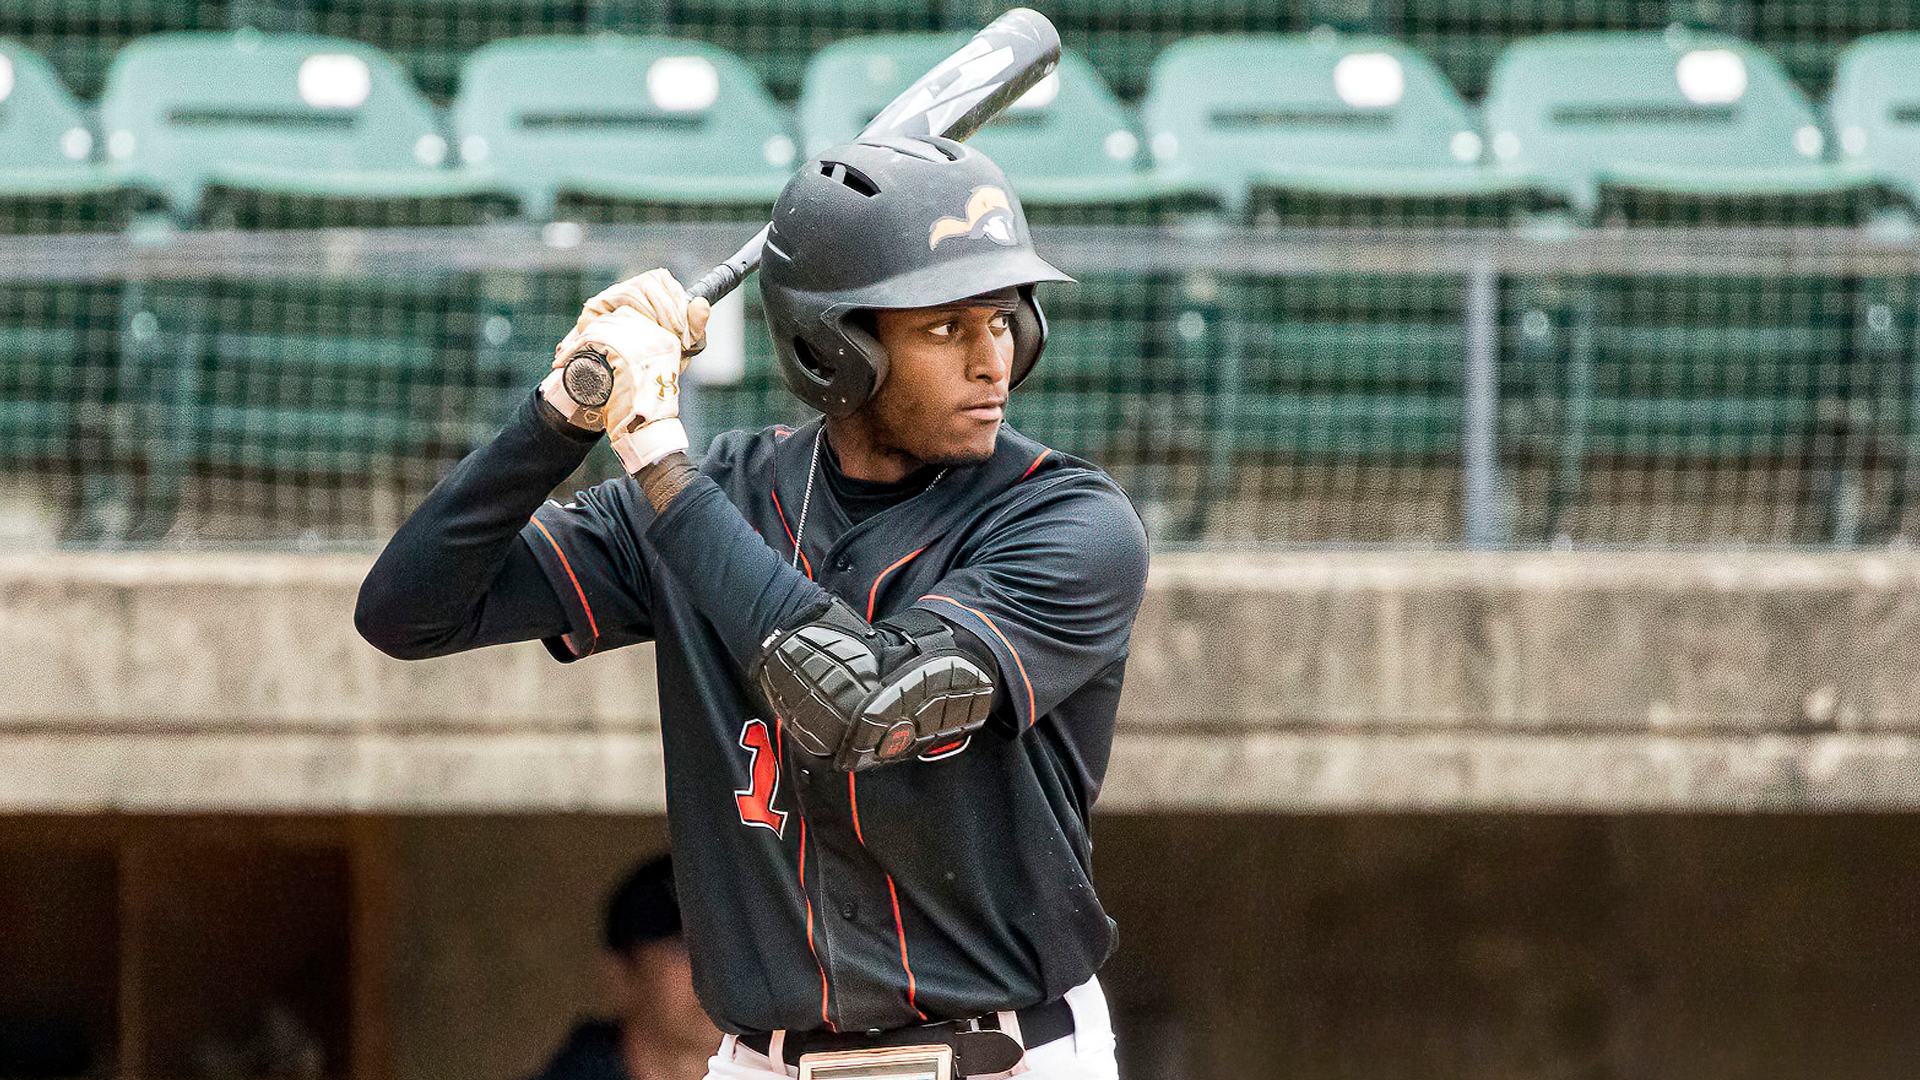 Ranel four-hit game sparks Tusculum to 10-4 win over Carson-Newman